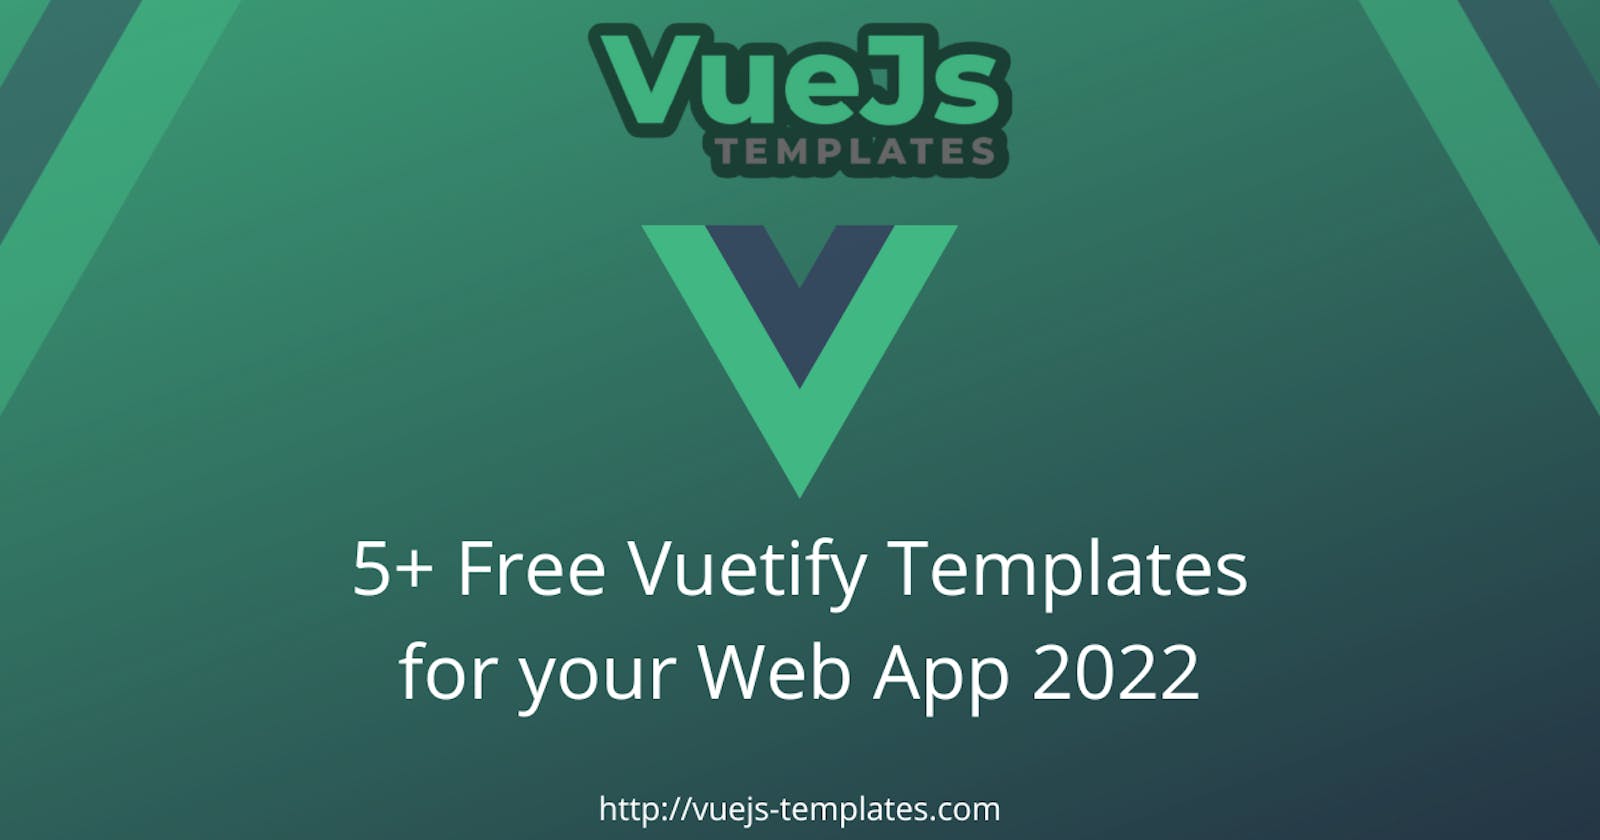 5+ Free Vuetify Templates for your Web App 2022